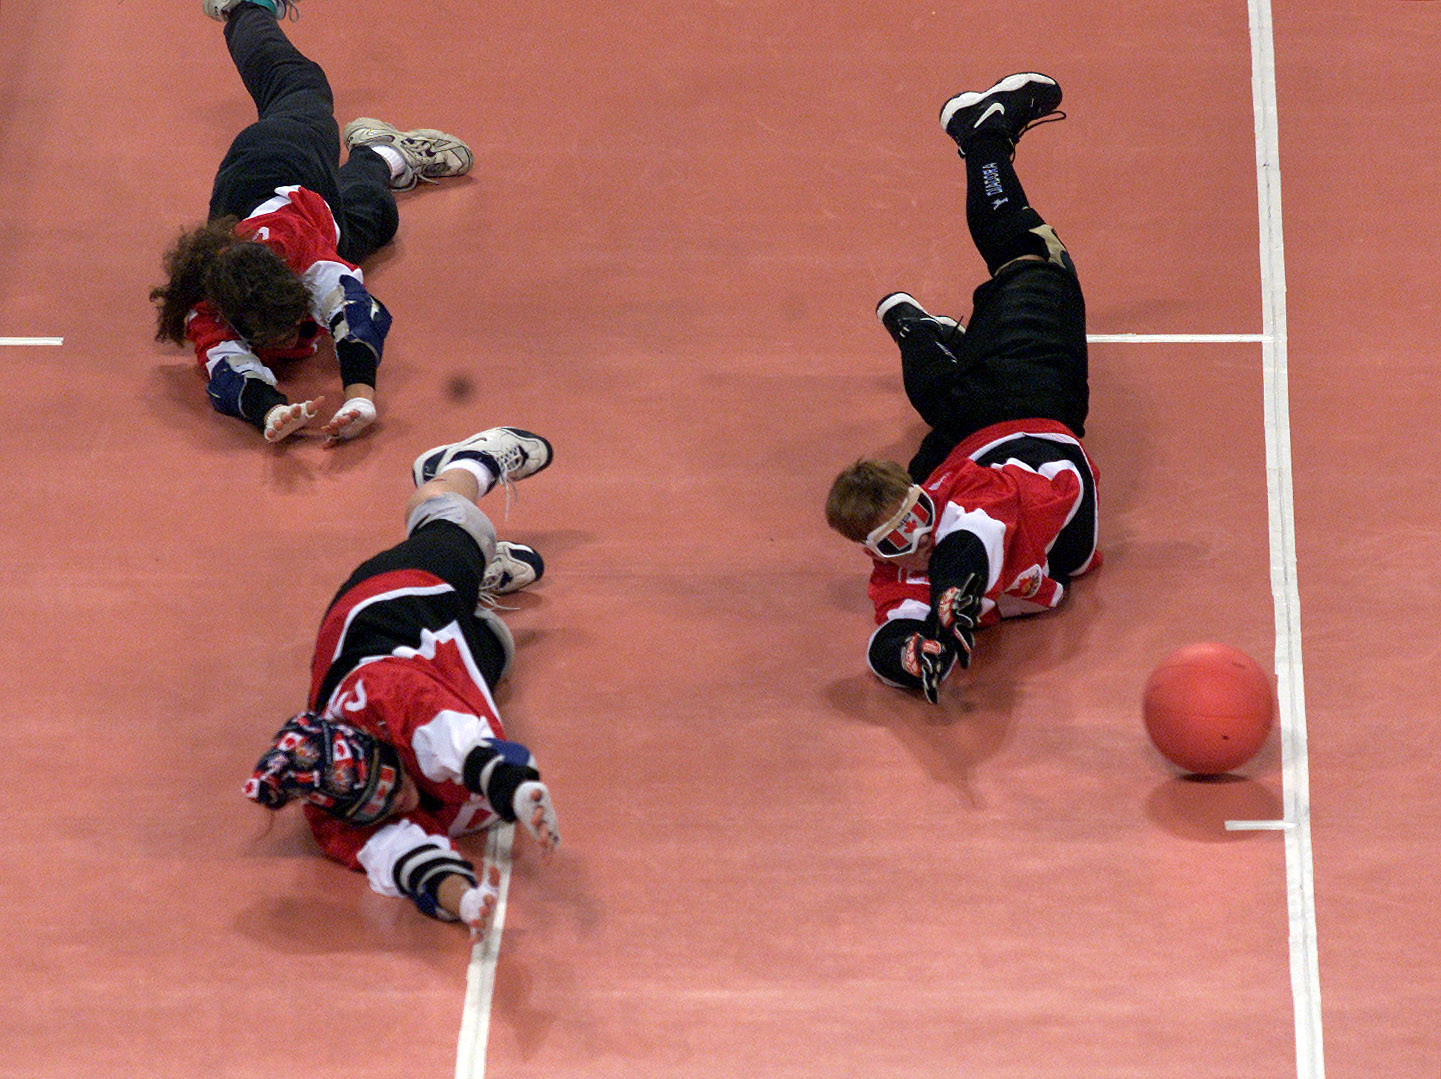 IBSA Goalball World Championships in Hangzhou cancelled over travel restrictions